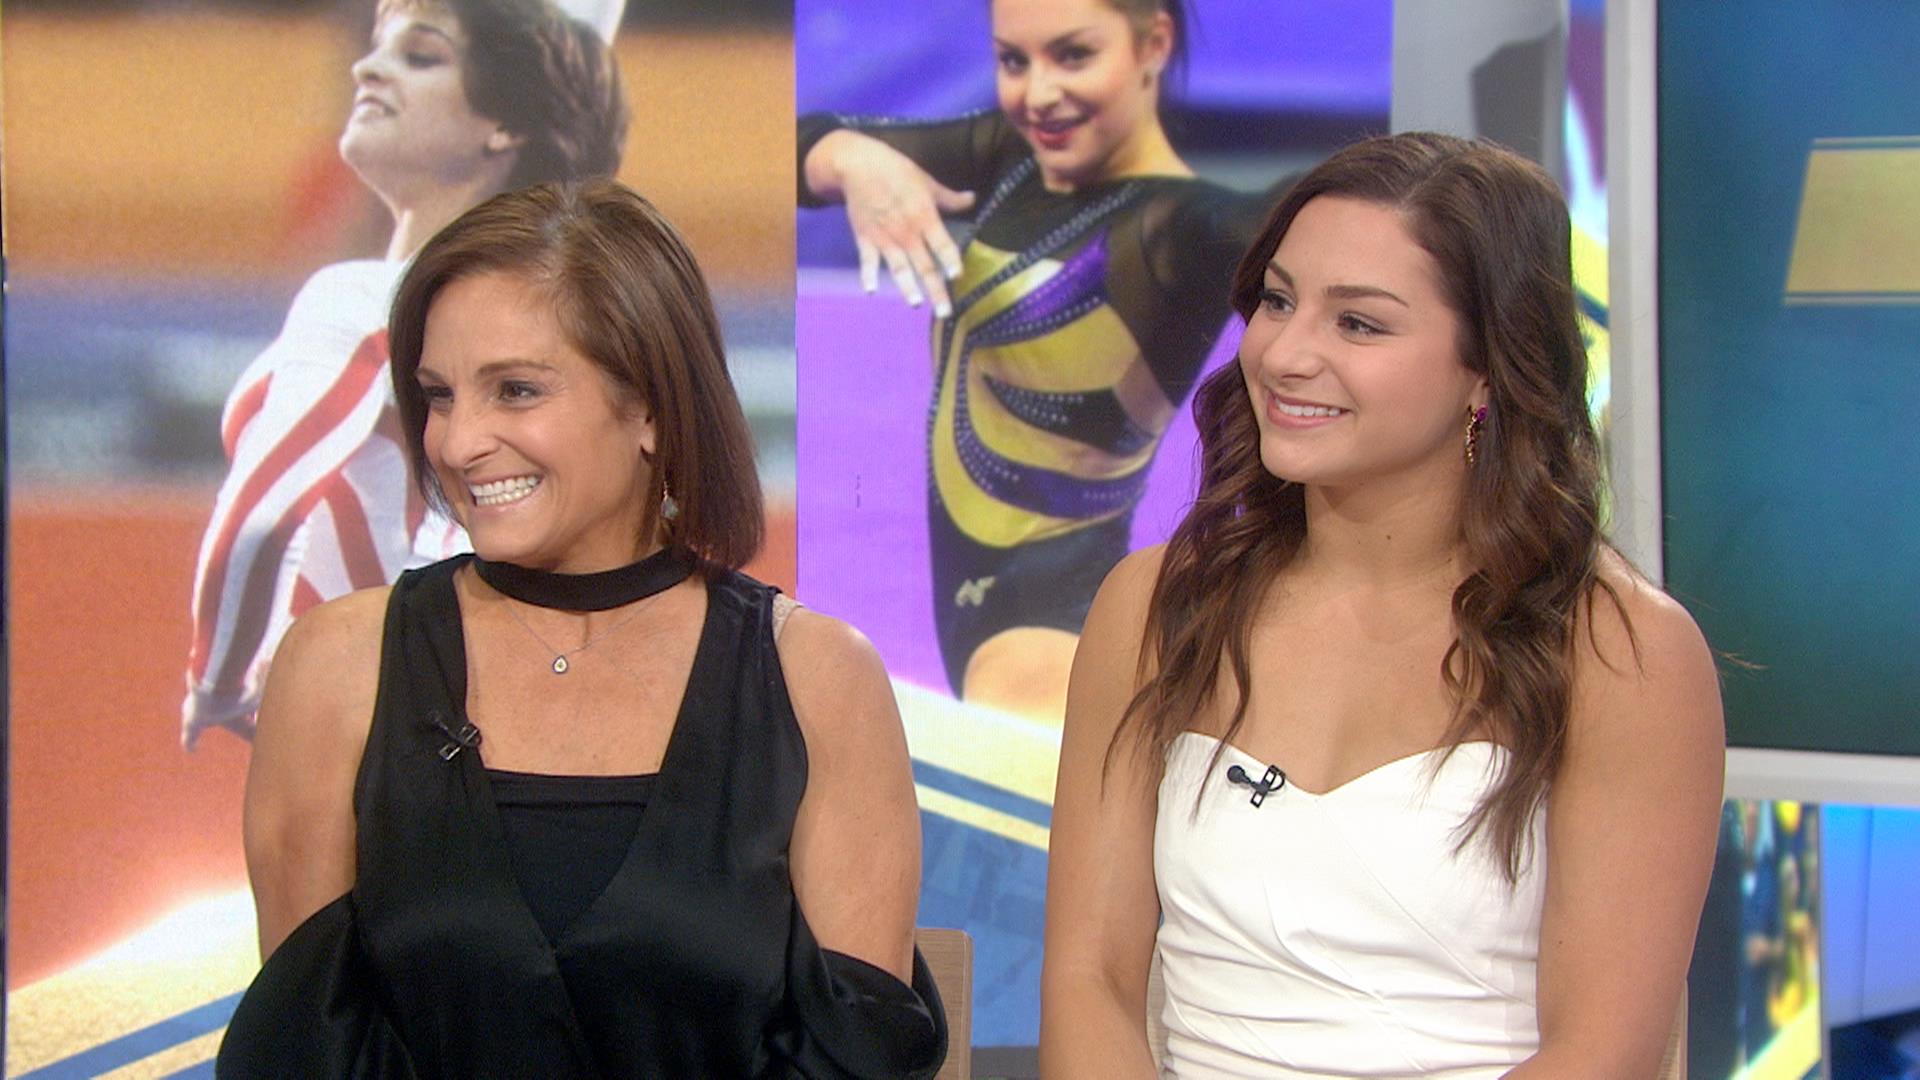 Mary Lou Retton’s Daughter Overwhelmed By $350k Donations, Expresses Gratitude For “Unbelievable Love”